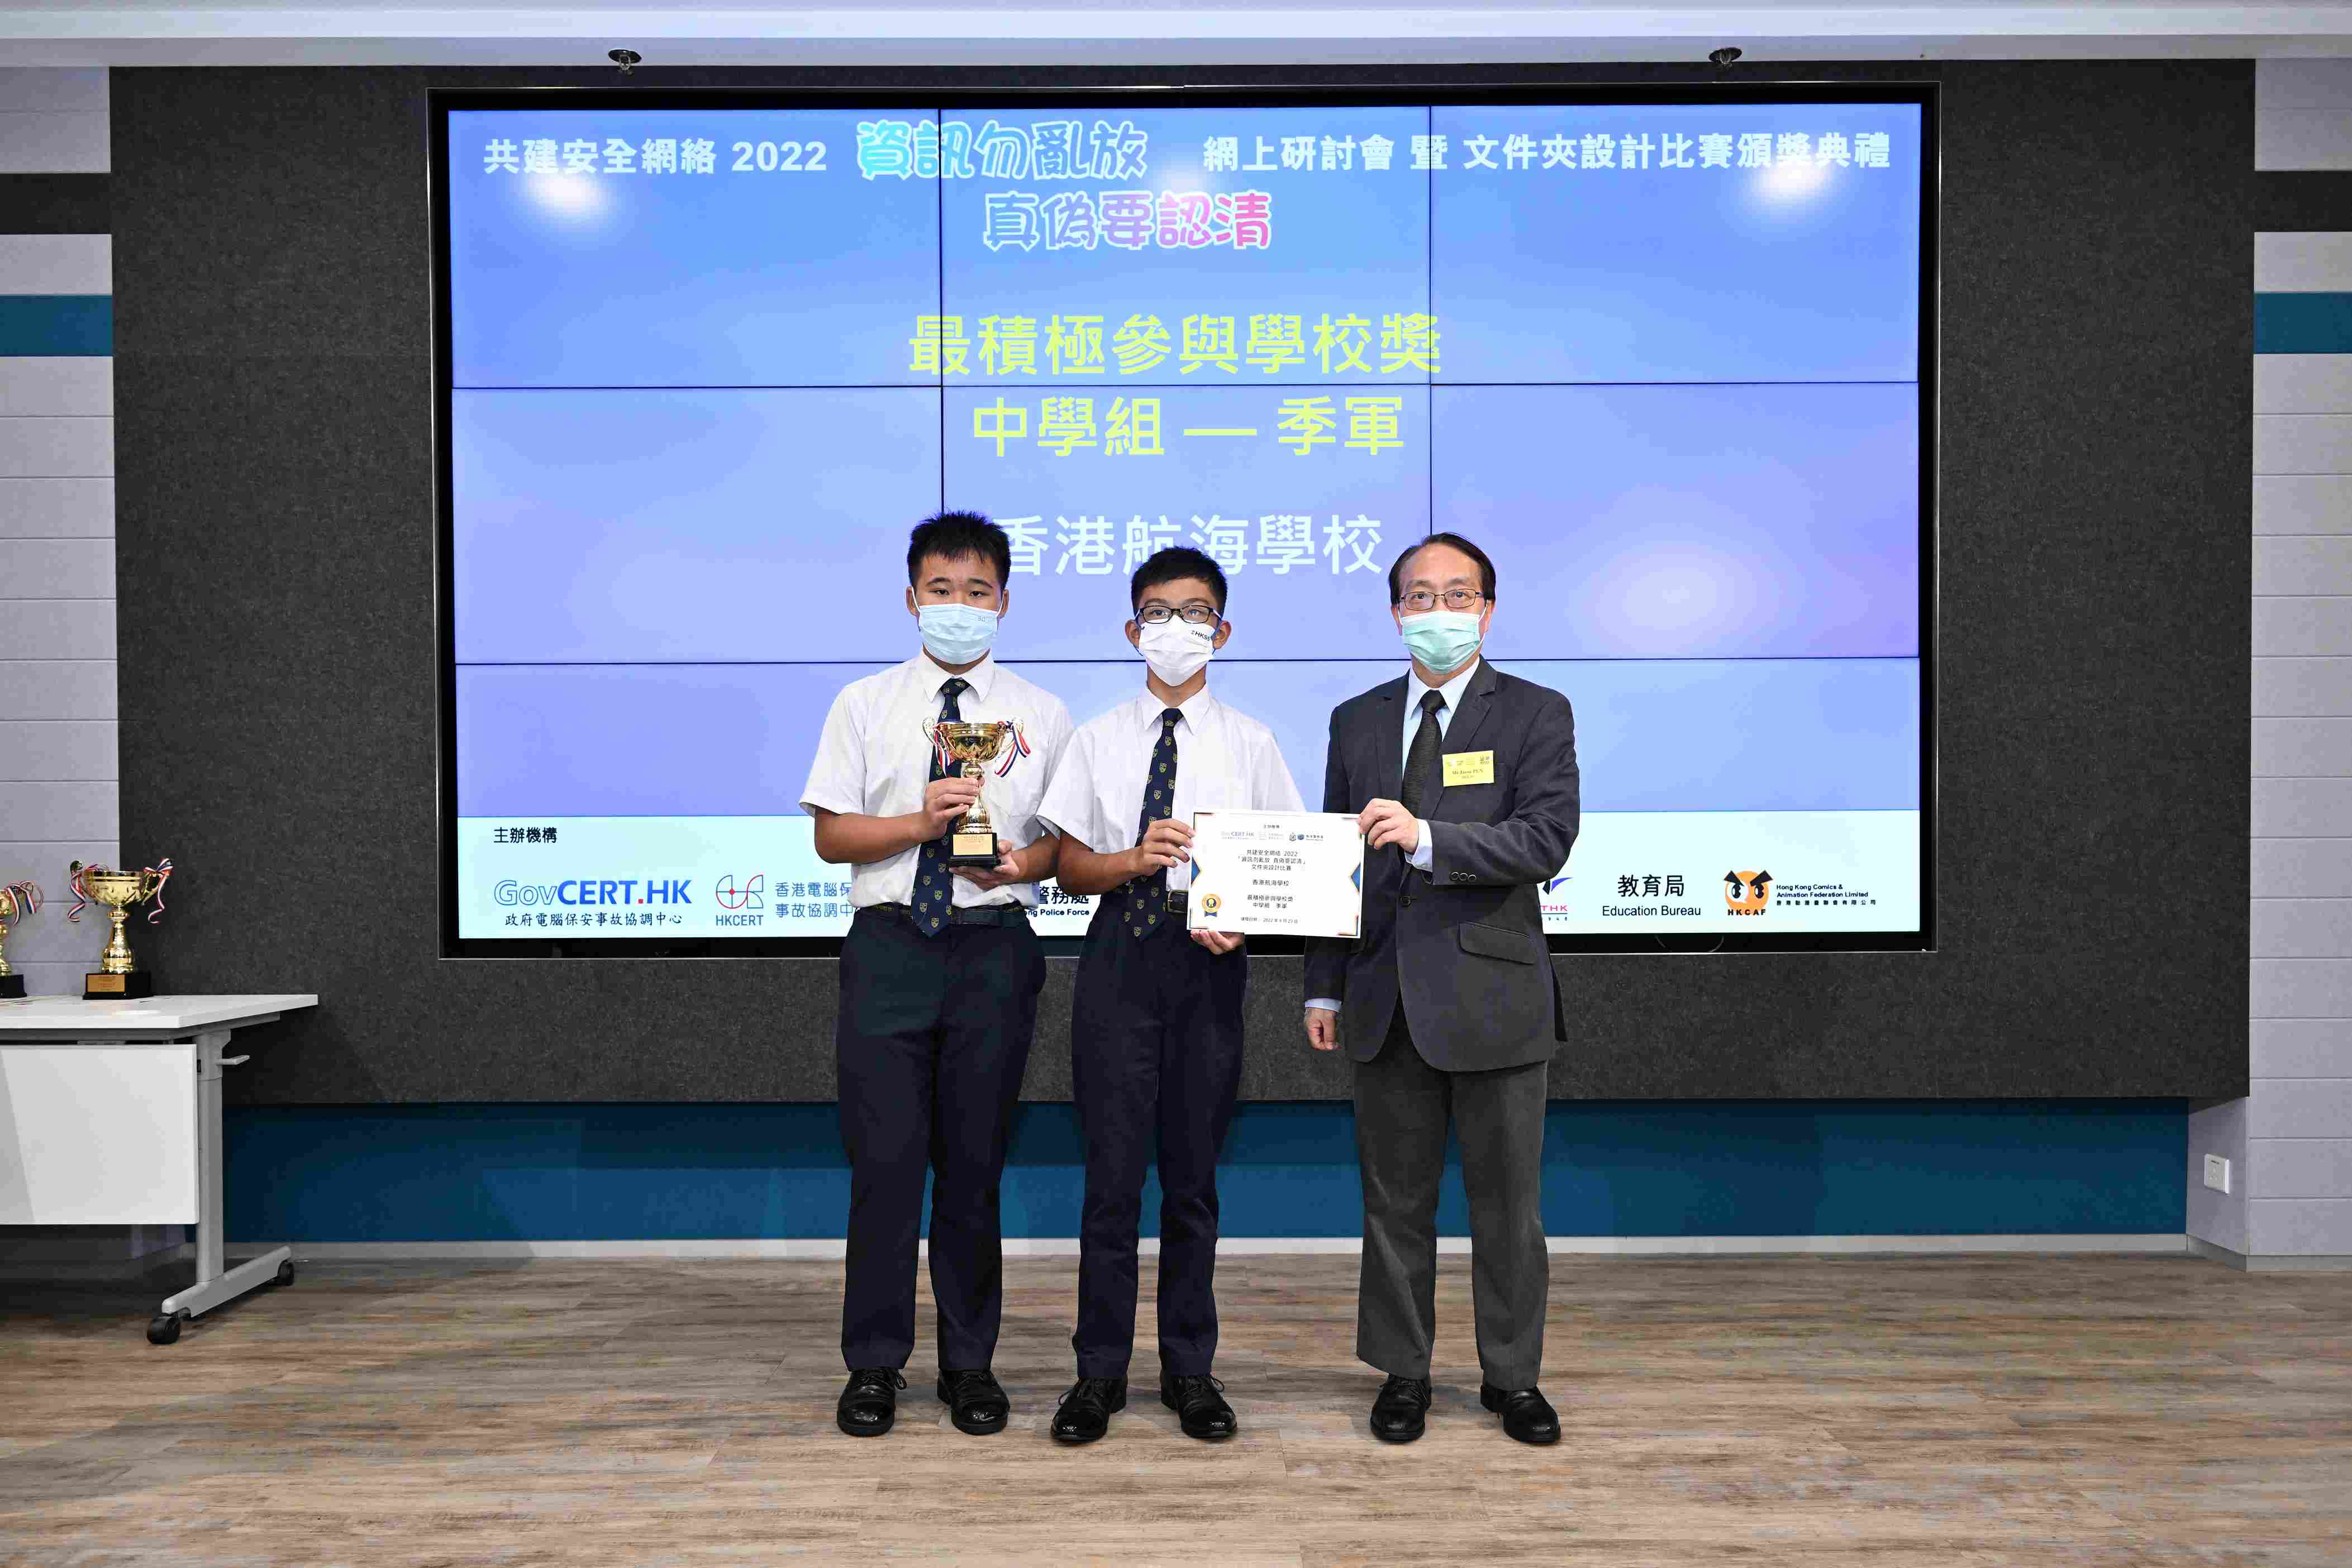 2nd Runner-up of Most Supportive School Award (Secondary School Group) - Hong Kong Sea School